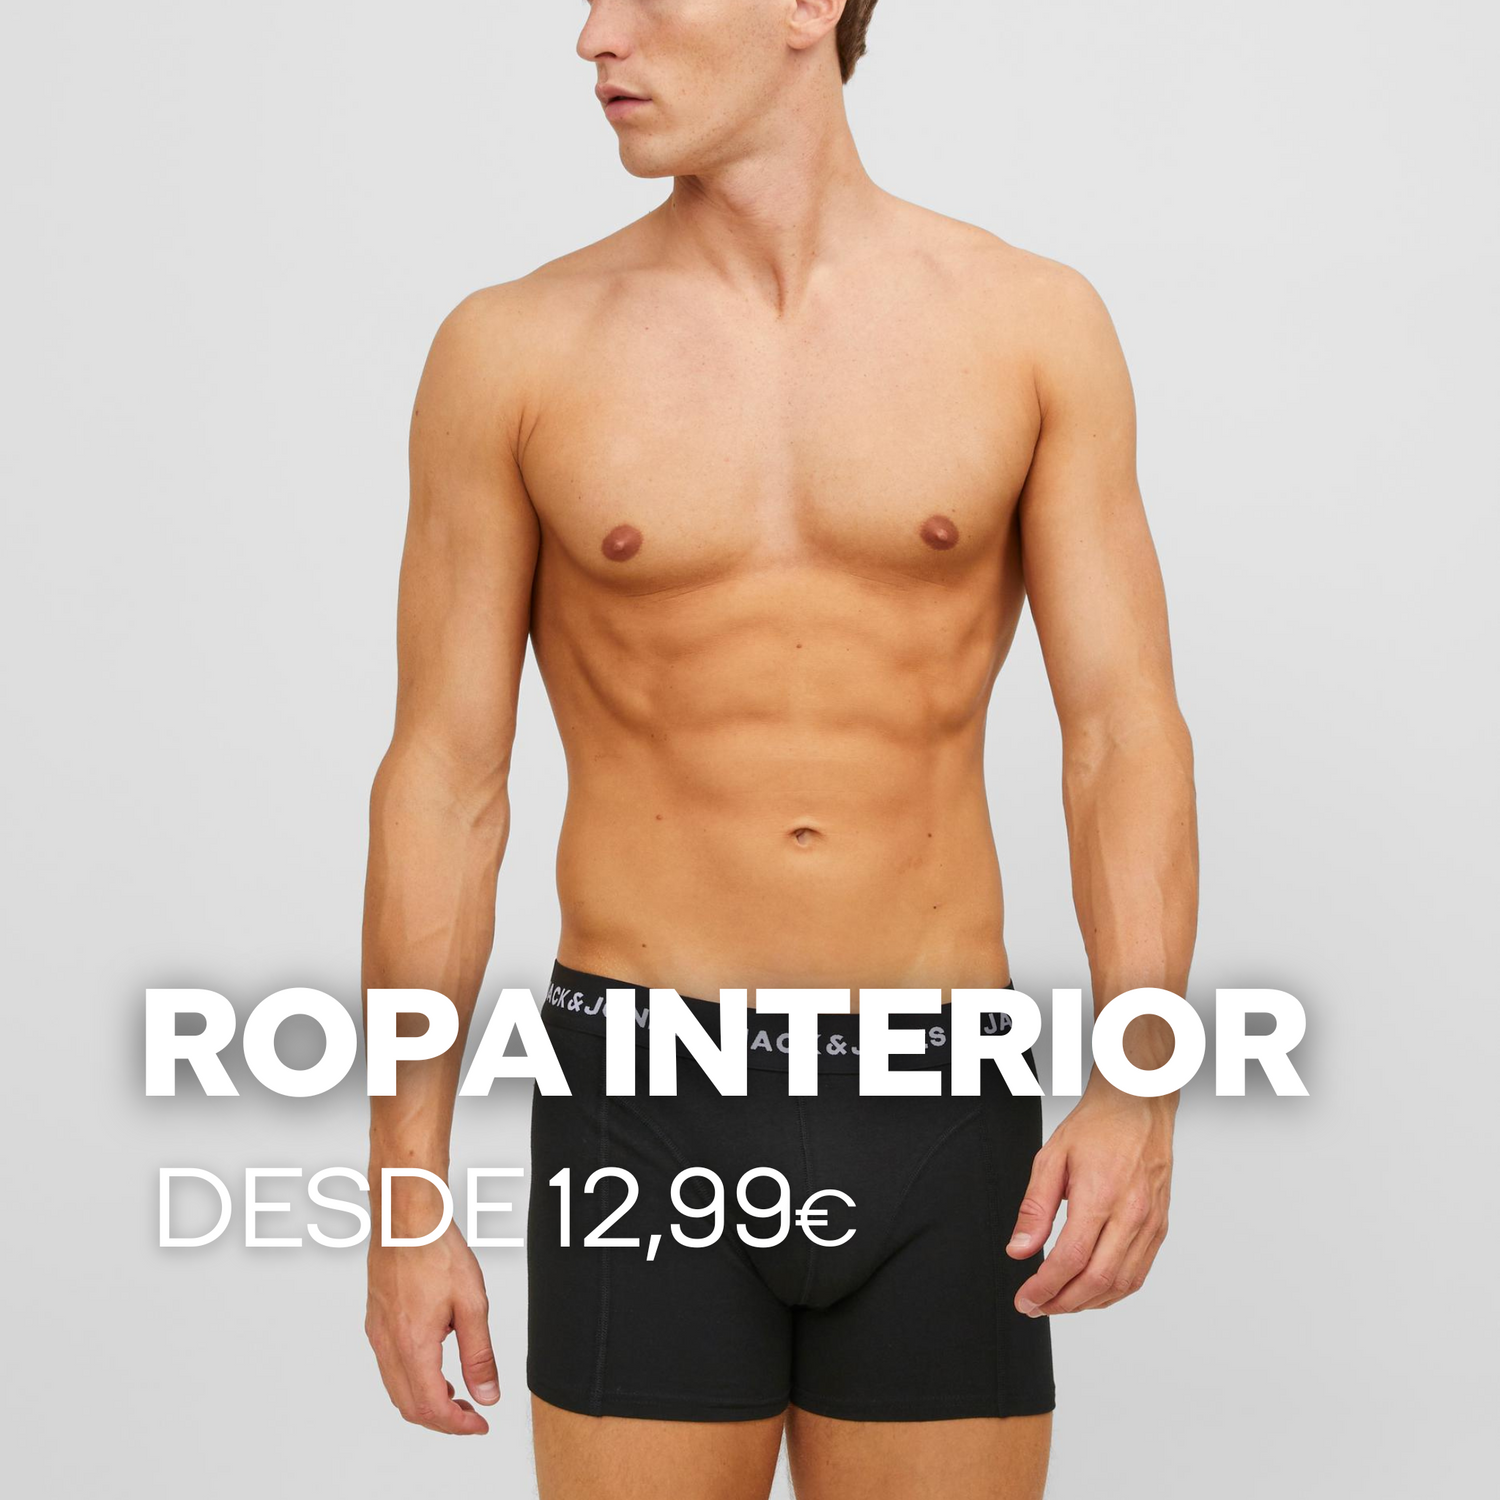 ROPA INTERIOR OUTLET